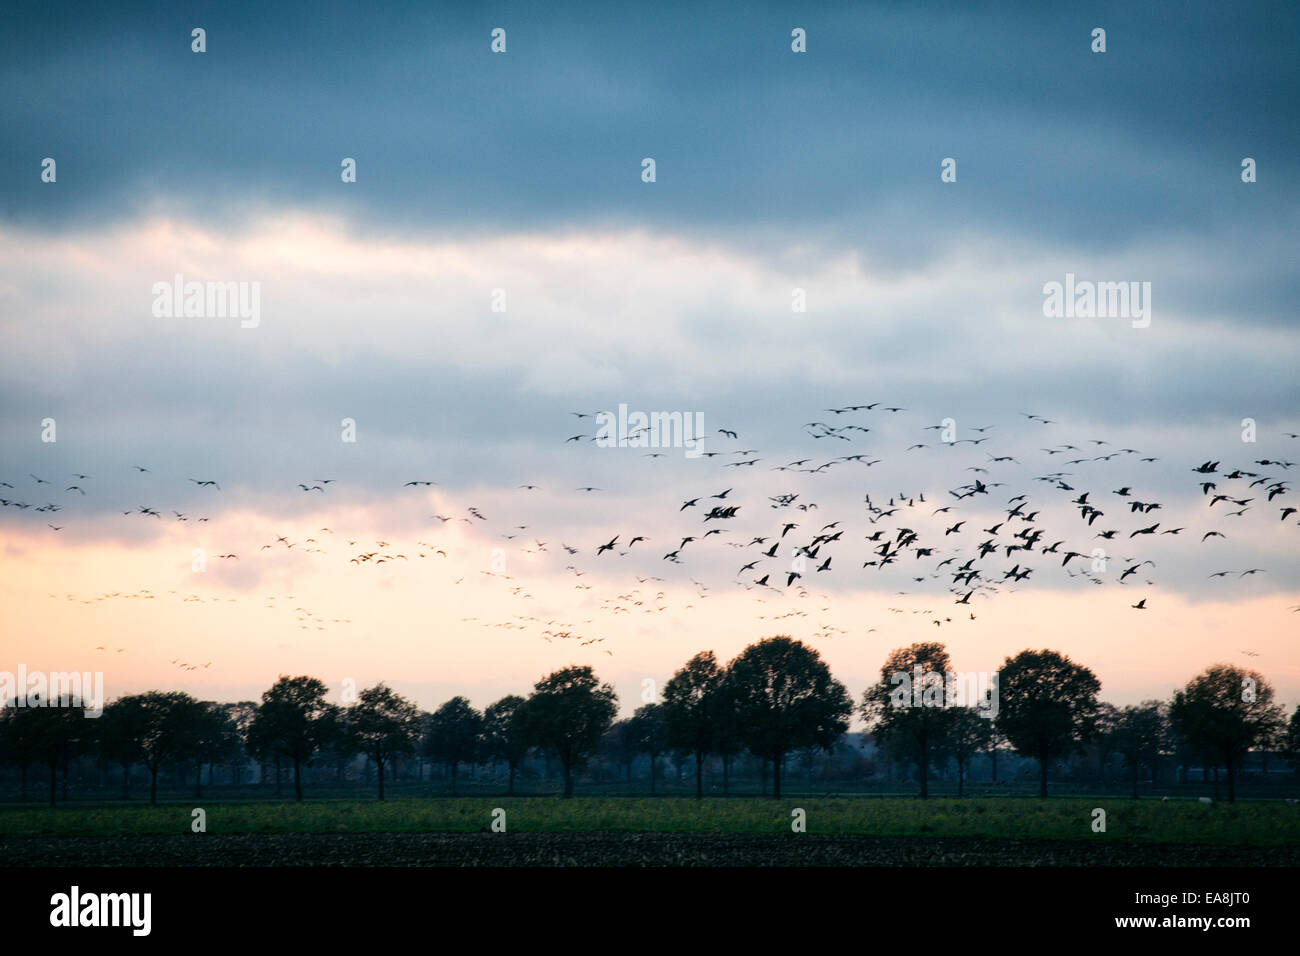 Flying geese gathering at sunset at a meadow at National Park 'de Groote Peel' in the Netherlands Stock Photo